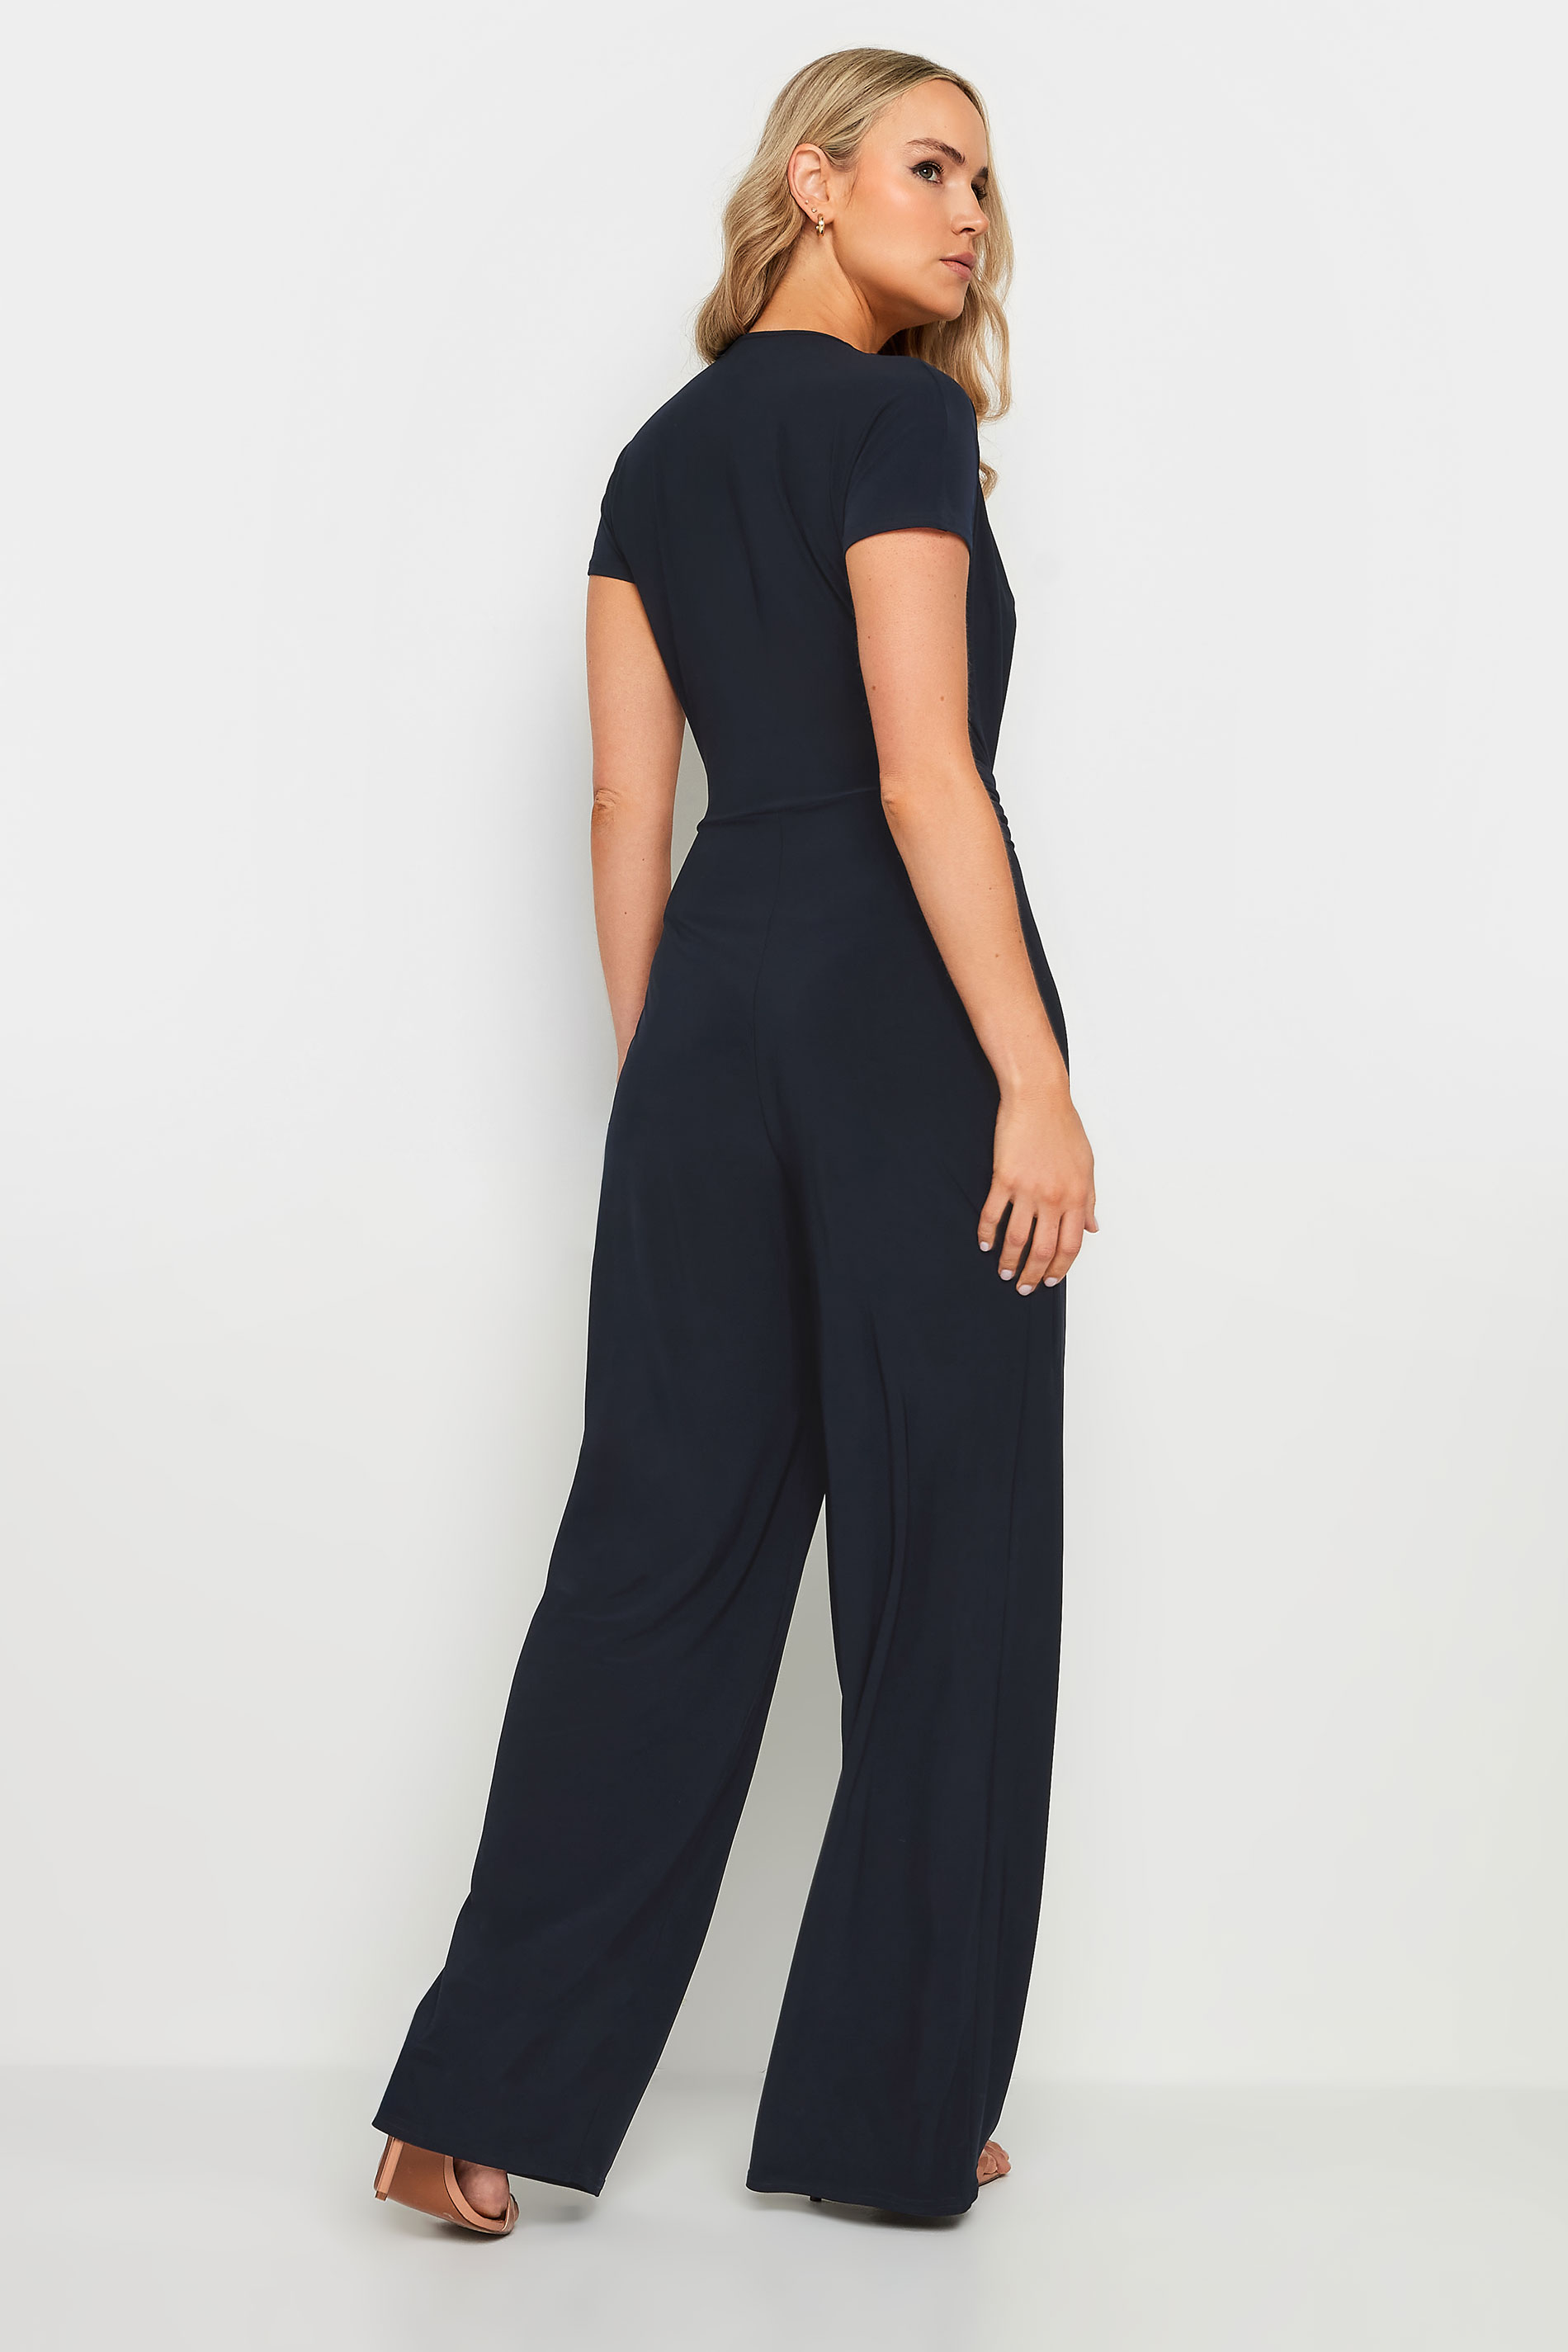 LTS Tall Women's Navy Blue Pleated Jumpsuit | Long Tall Sally 3